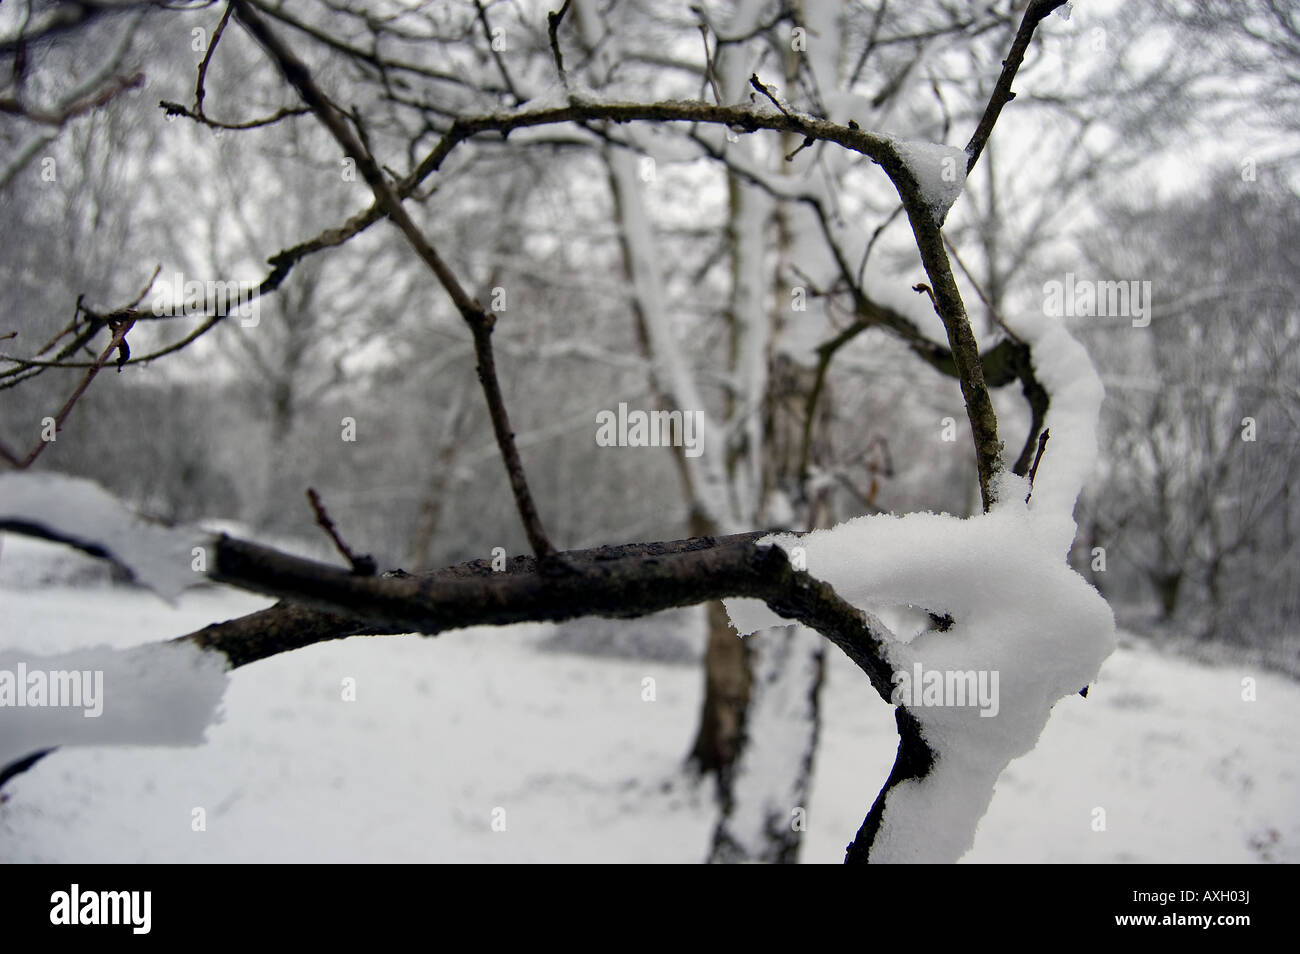 Snow on a branch. Stock Photo